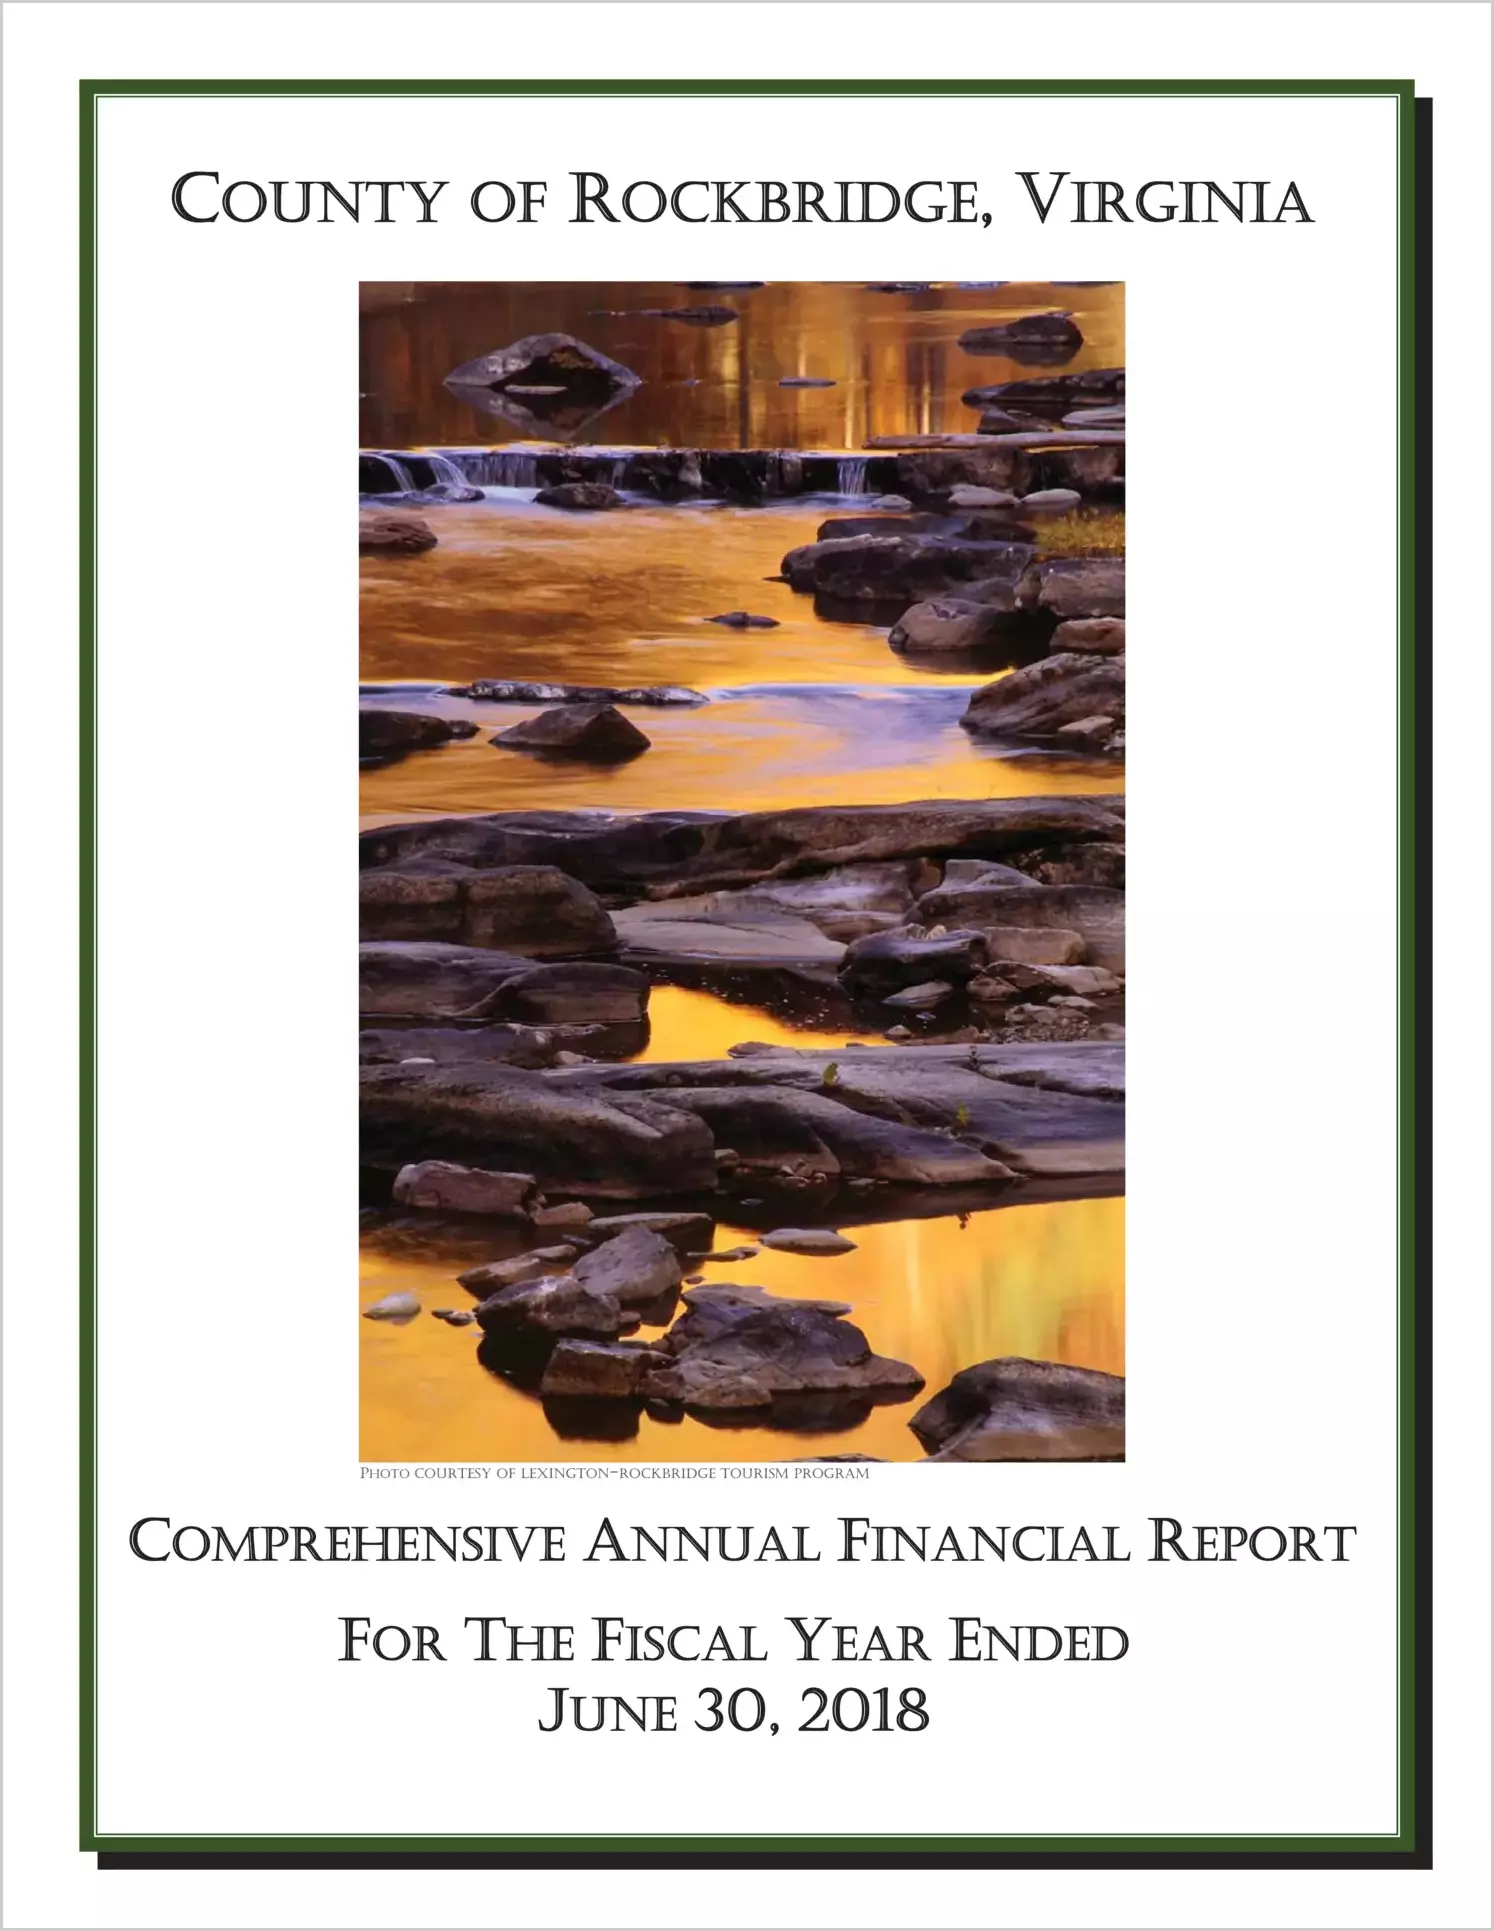 2018 Annual Financial Report for County of Rockbridge